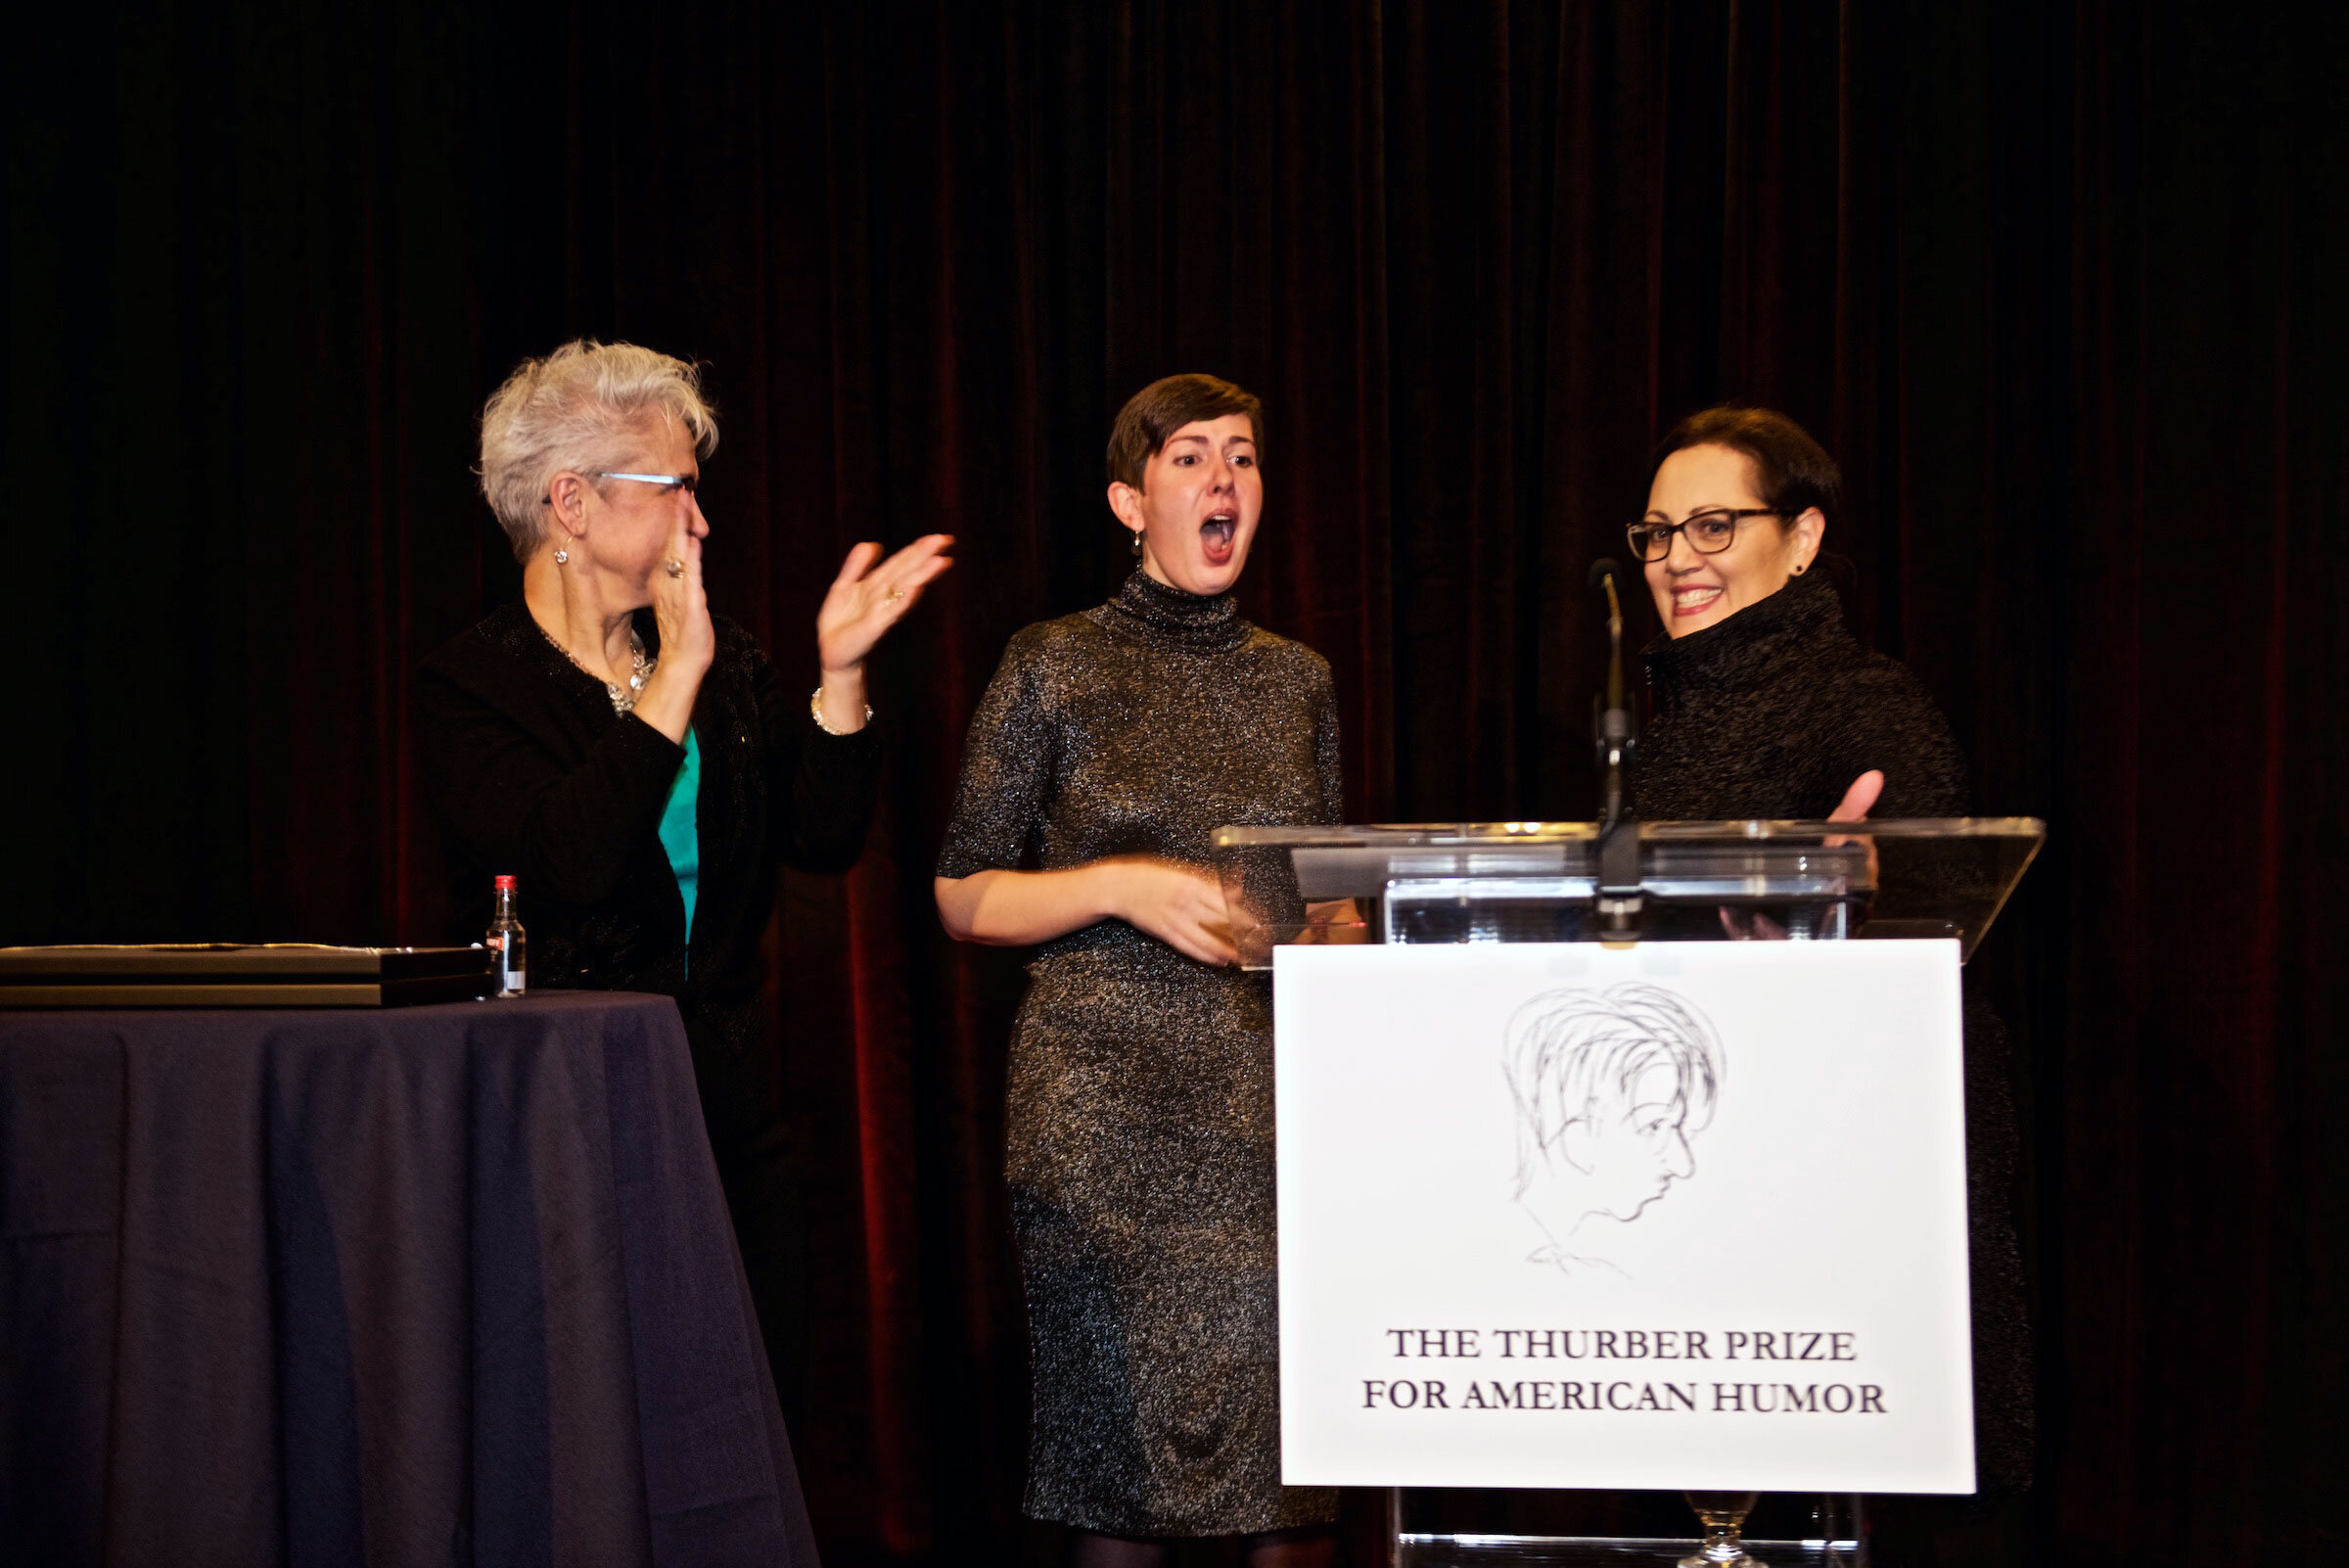  Patricia Lockwood Winning the Thurber Prize for American Humor 